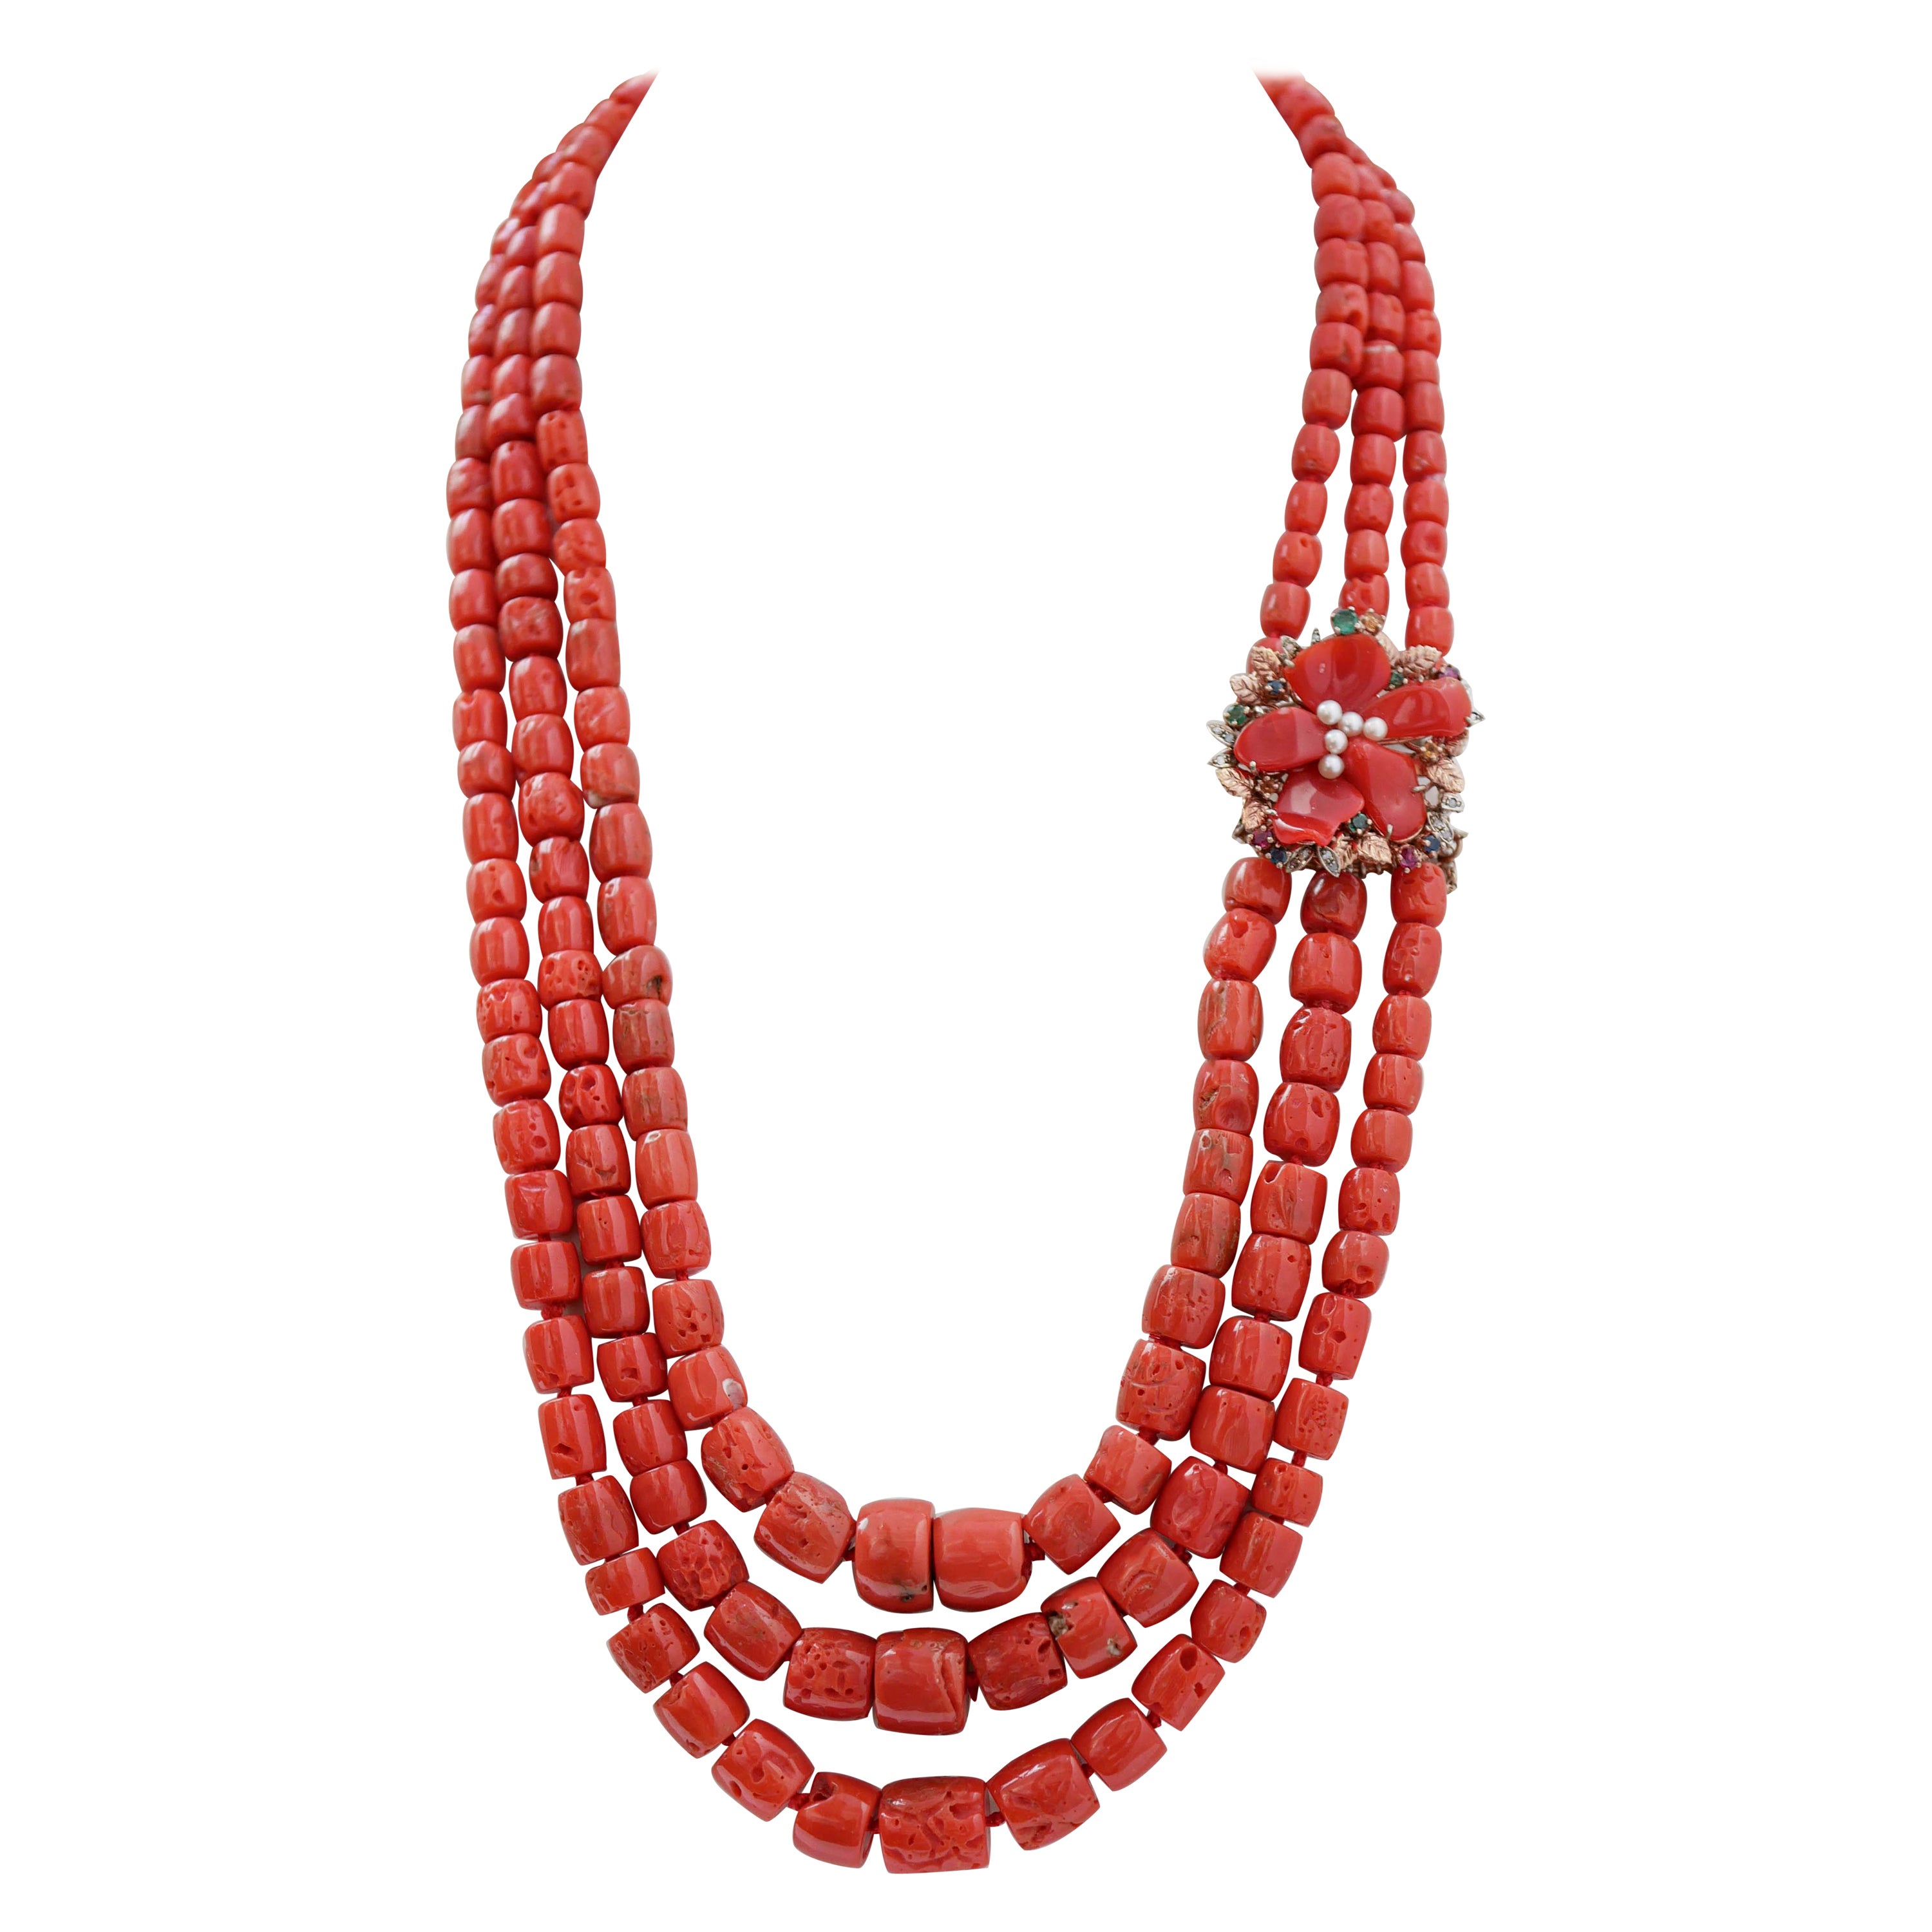 Coral, Pearls, Rubies, Emeralds, Sapphires, Diamonds, Gold and Silver Necklace.